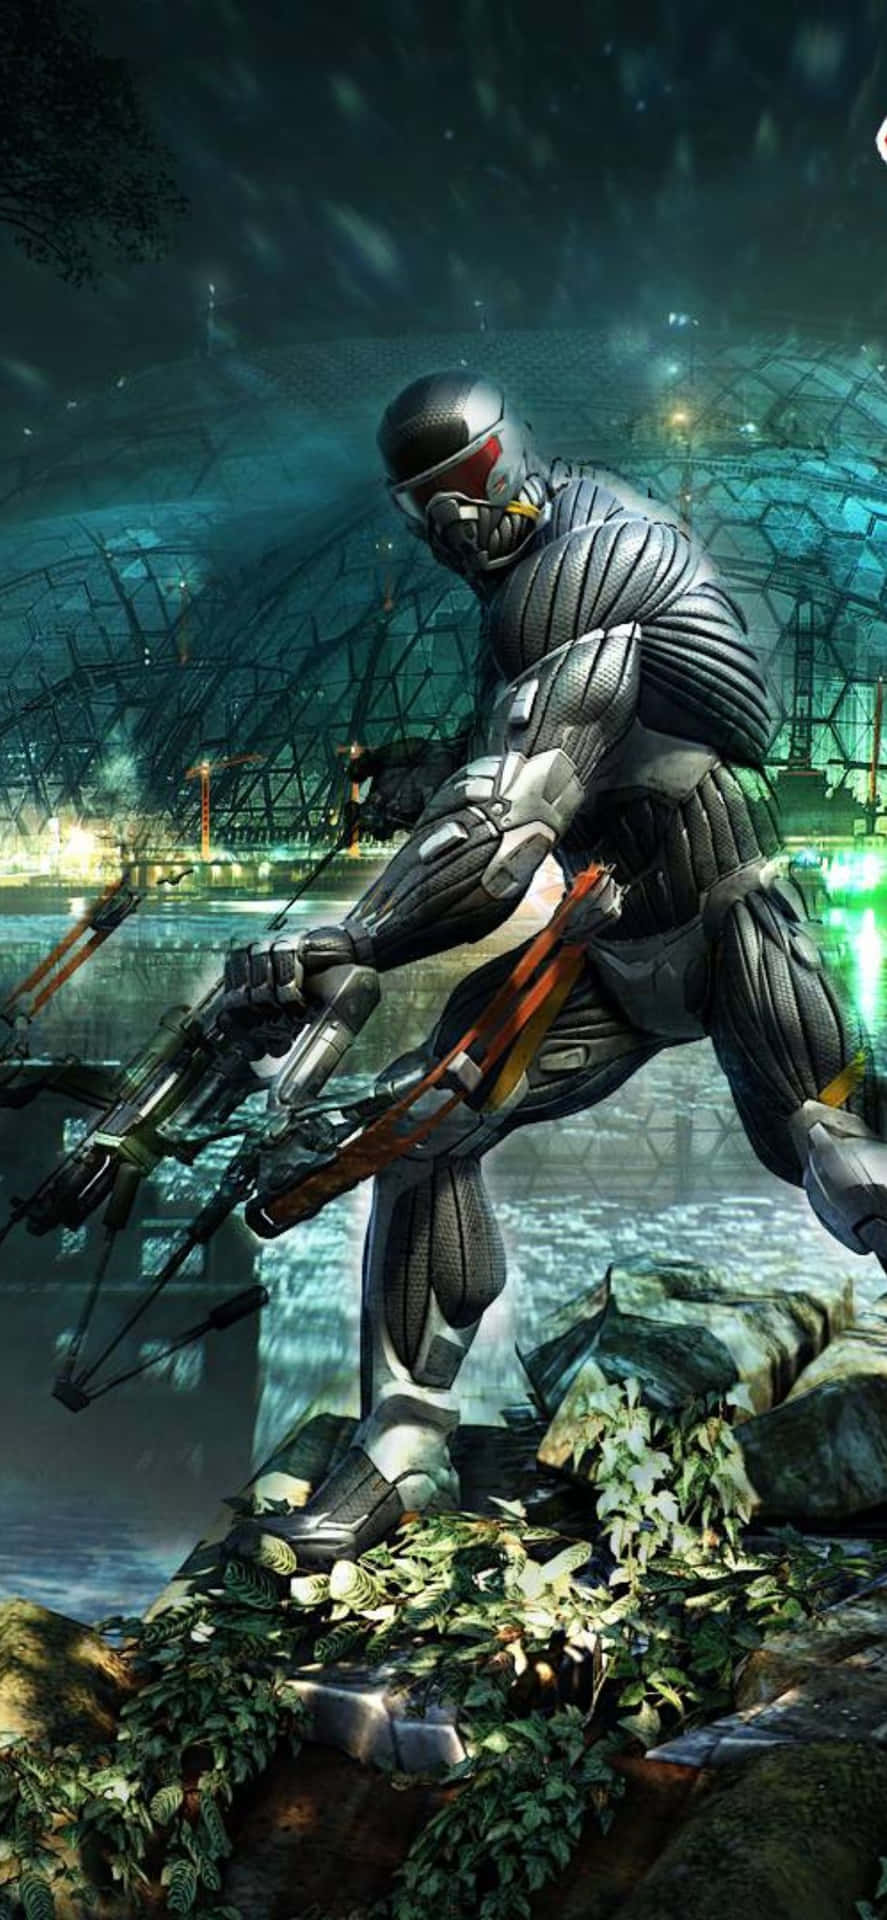 Iphone X Crysis 3 Background Wallpaper